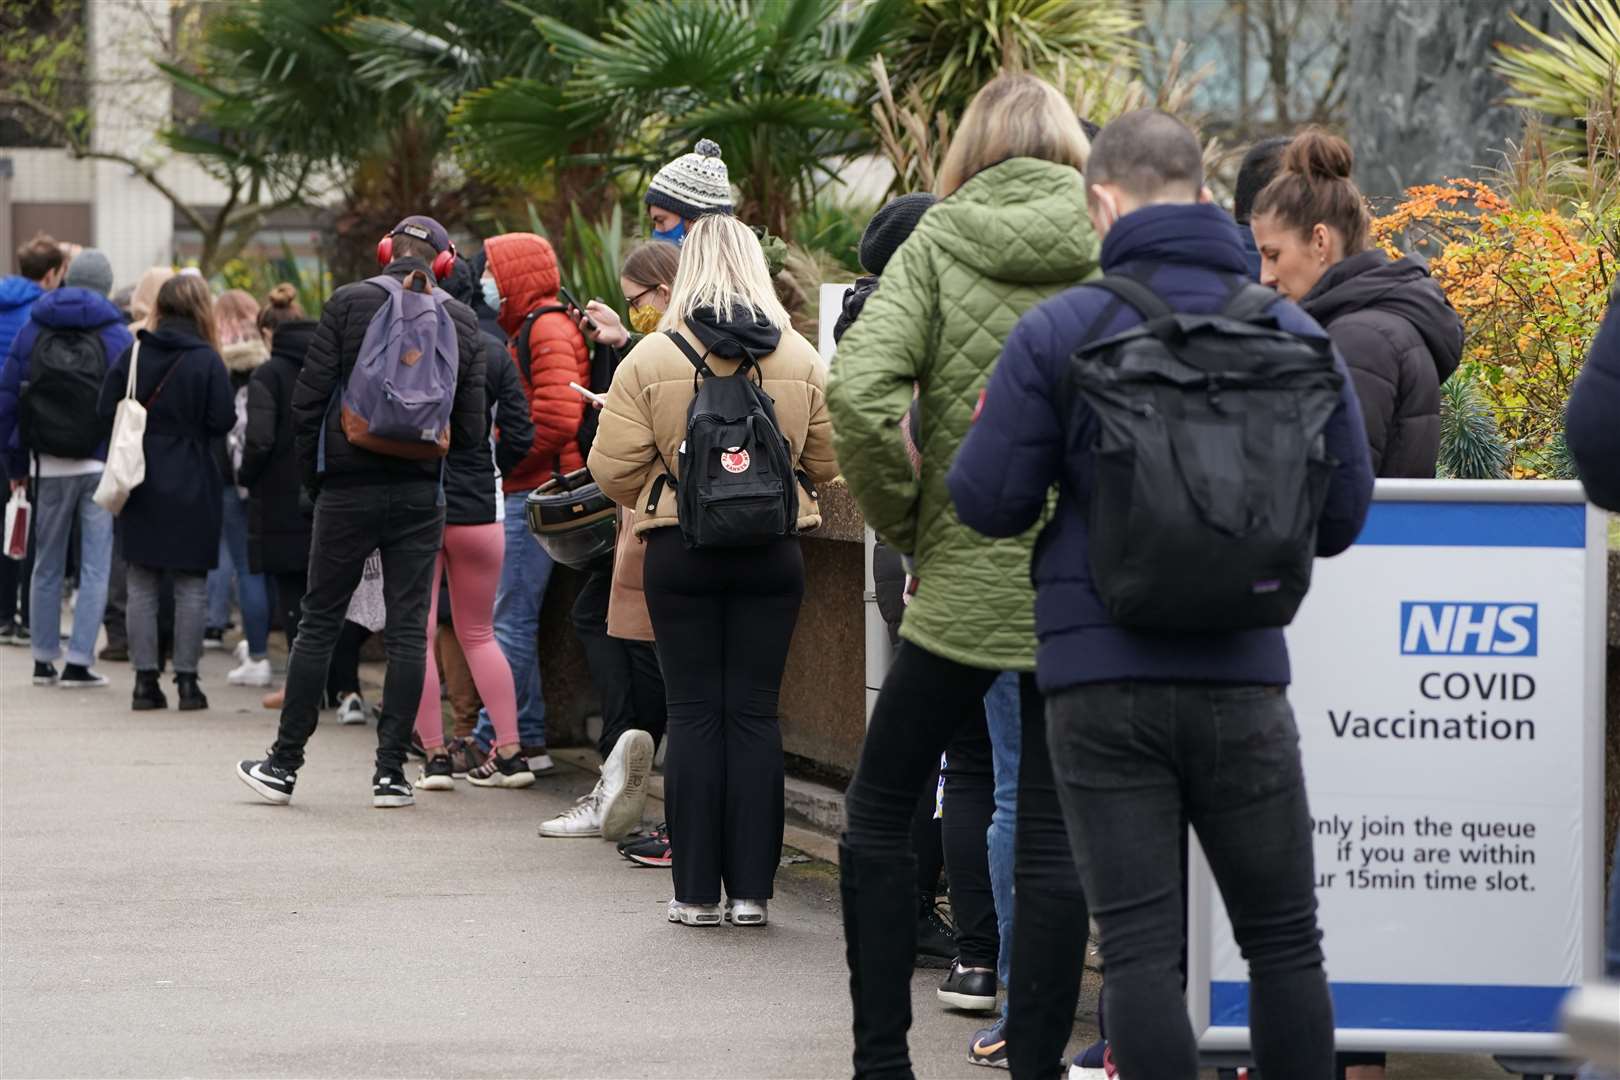 Queues outside vaccination centres on Monday (Kirsty O’Connor/PA)